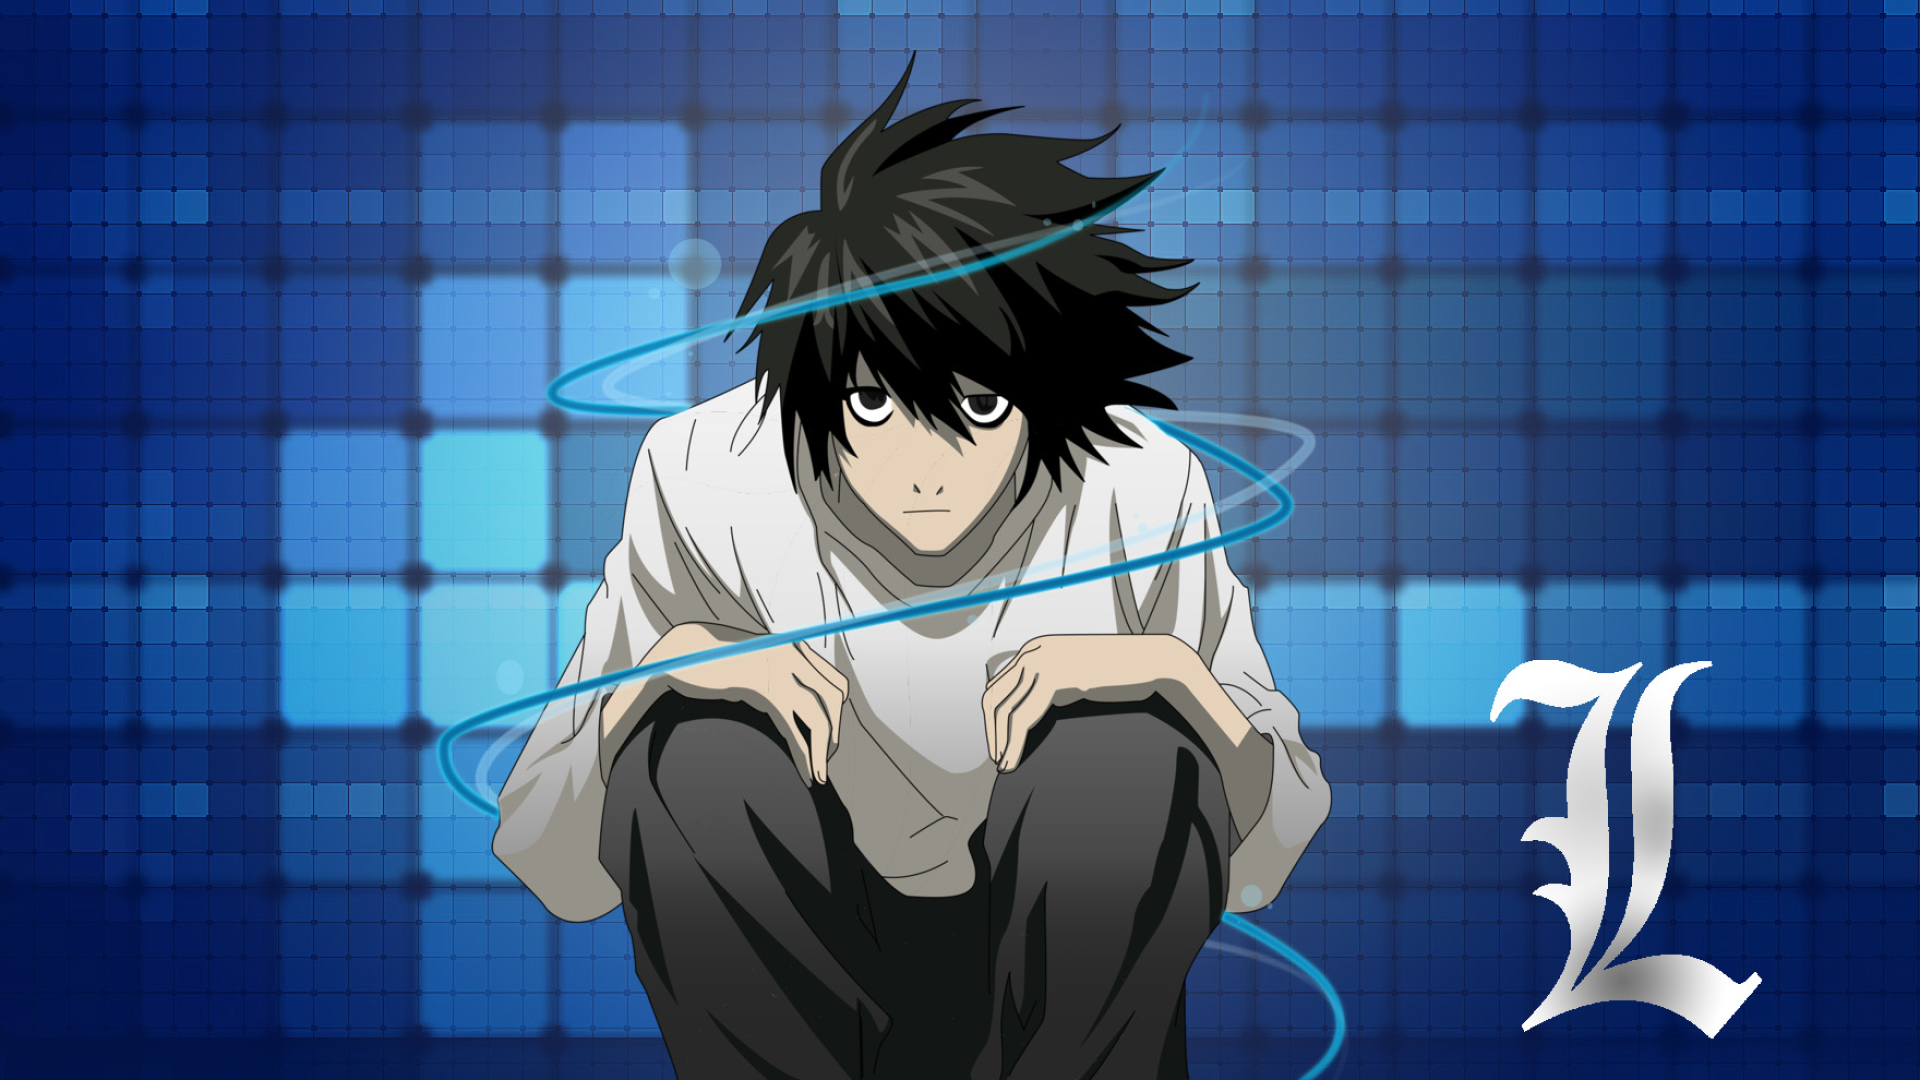 L Death Note Profile 1920x1080 Wallpaper Teahub Io Search free death logo wallpapers on zedge and personalize your phone to suit you. l death note profile 1920x1080